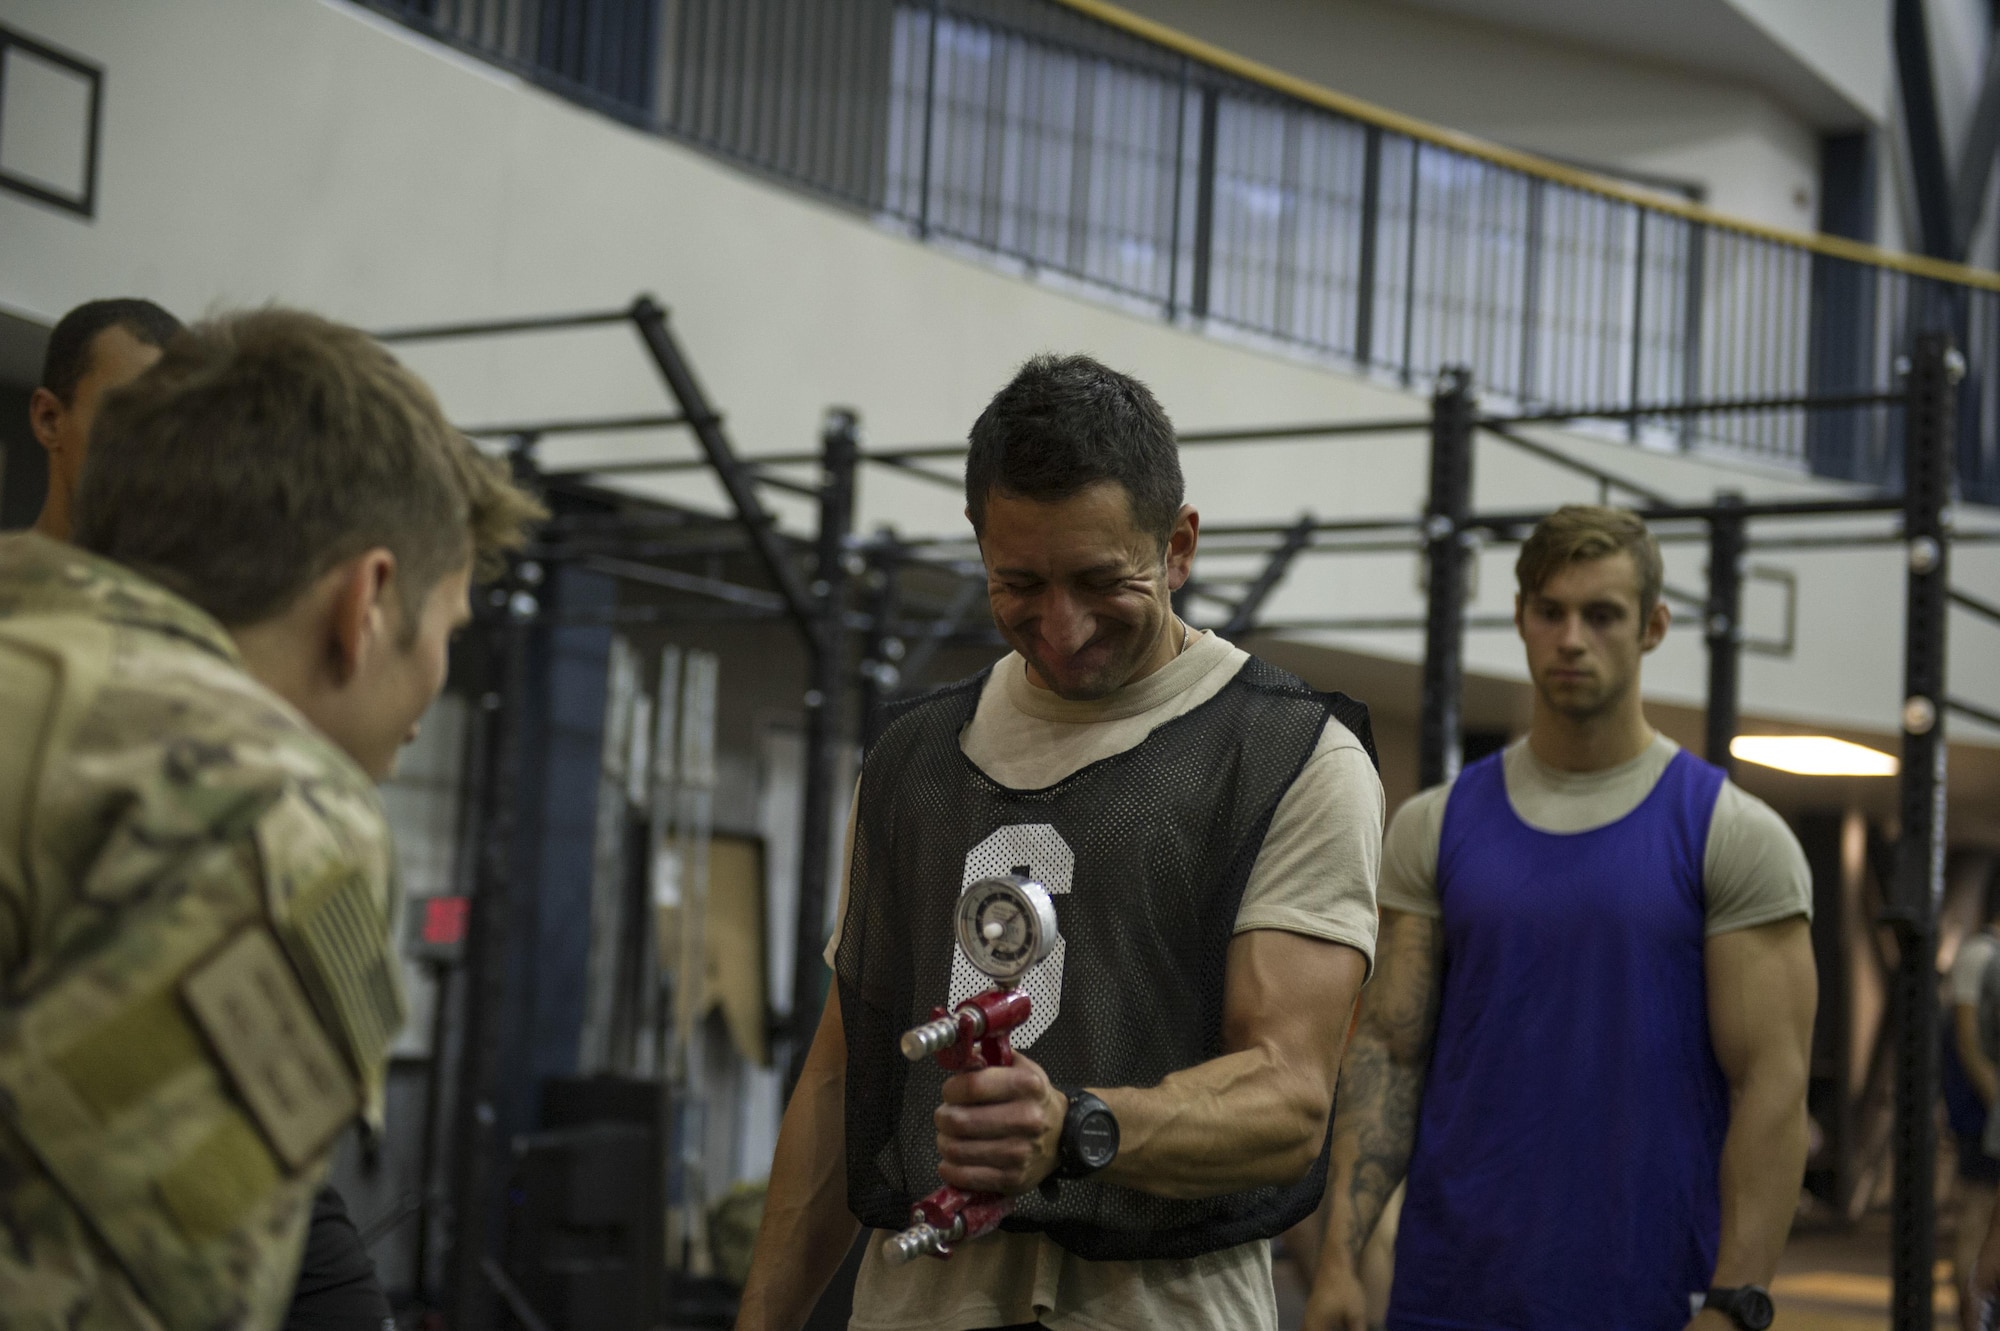 U.S. Air Force Staff Sgt. Kristopher Harpoon, 5th Air Support Operations Squadron, Joint Base Lewis-McChord, Wash., tactical air control party specialist, performs a grip strength test during a Battlefield Airman physical training (PT) test July 21, 2016, at Baker Field house on Eielson Air Force Base, Alaska. The last challenge of the competition was for competitors to complete a PT test. (U.S. Air Force photo by Airman Isaac Johnson)